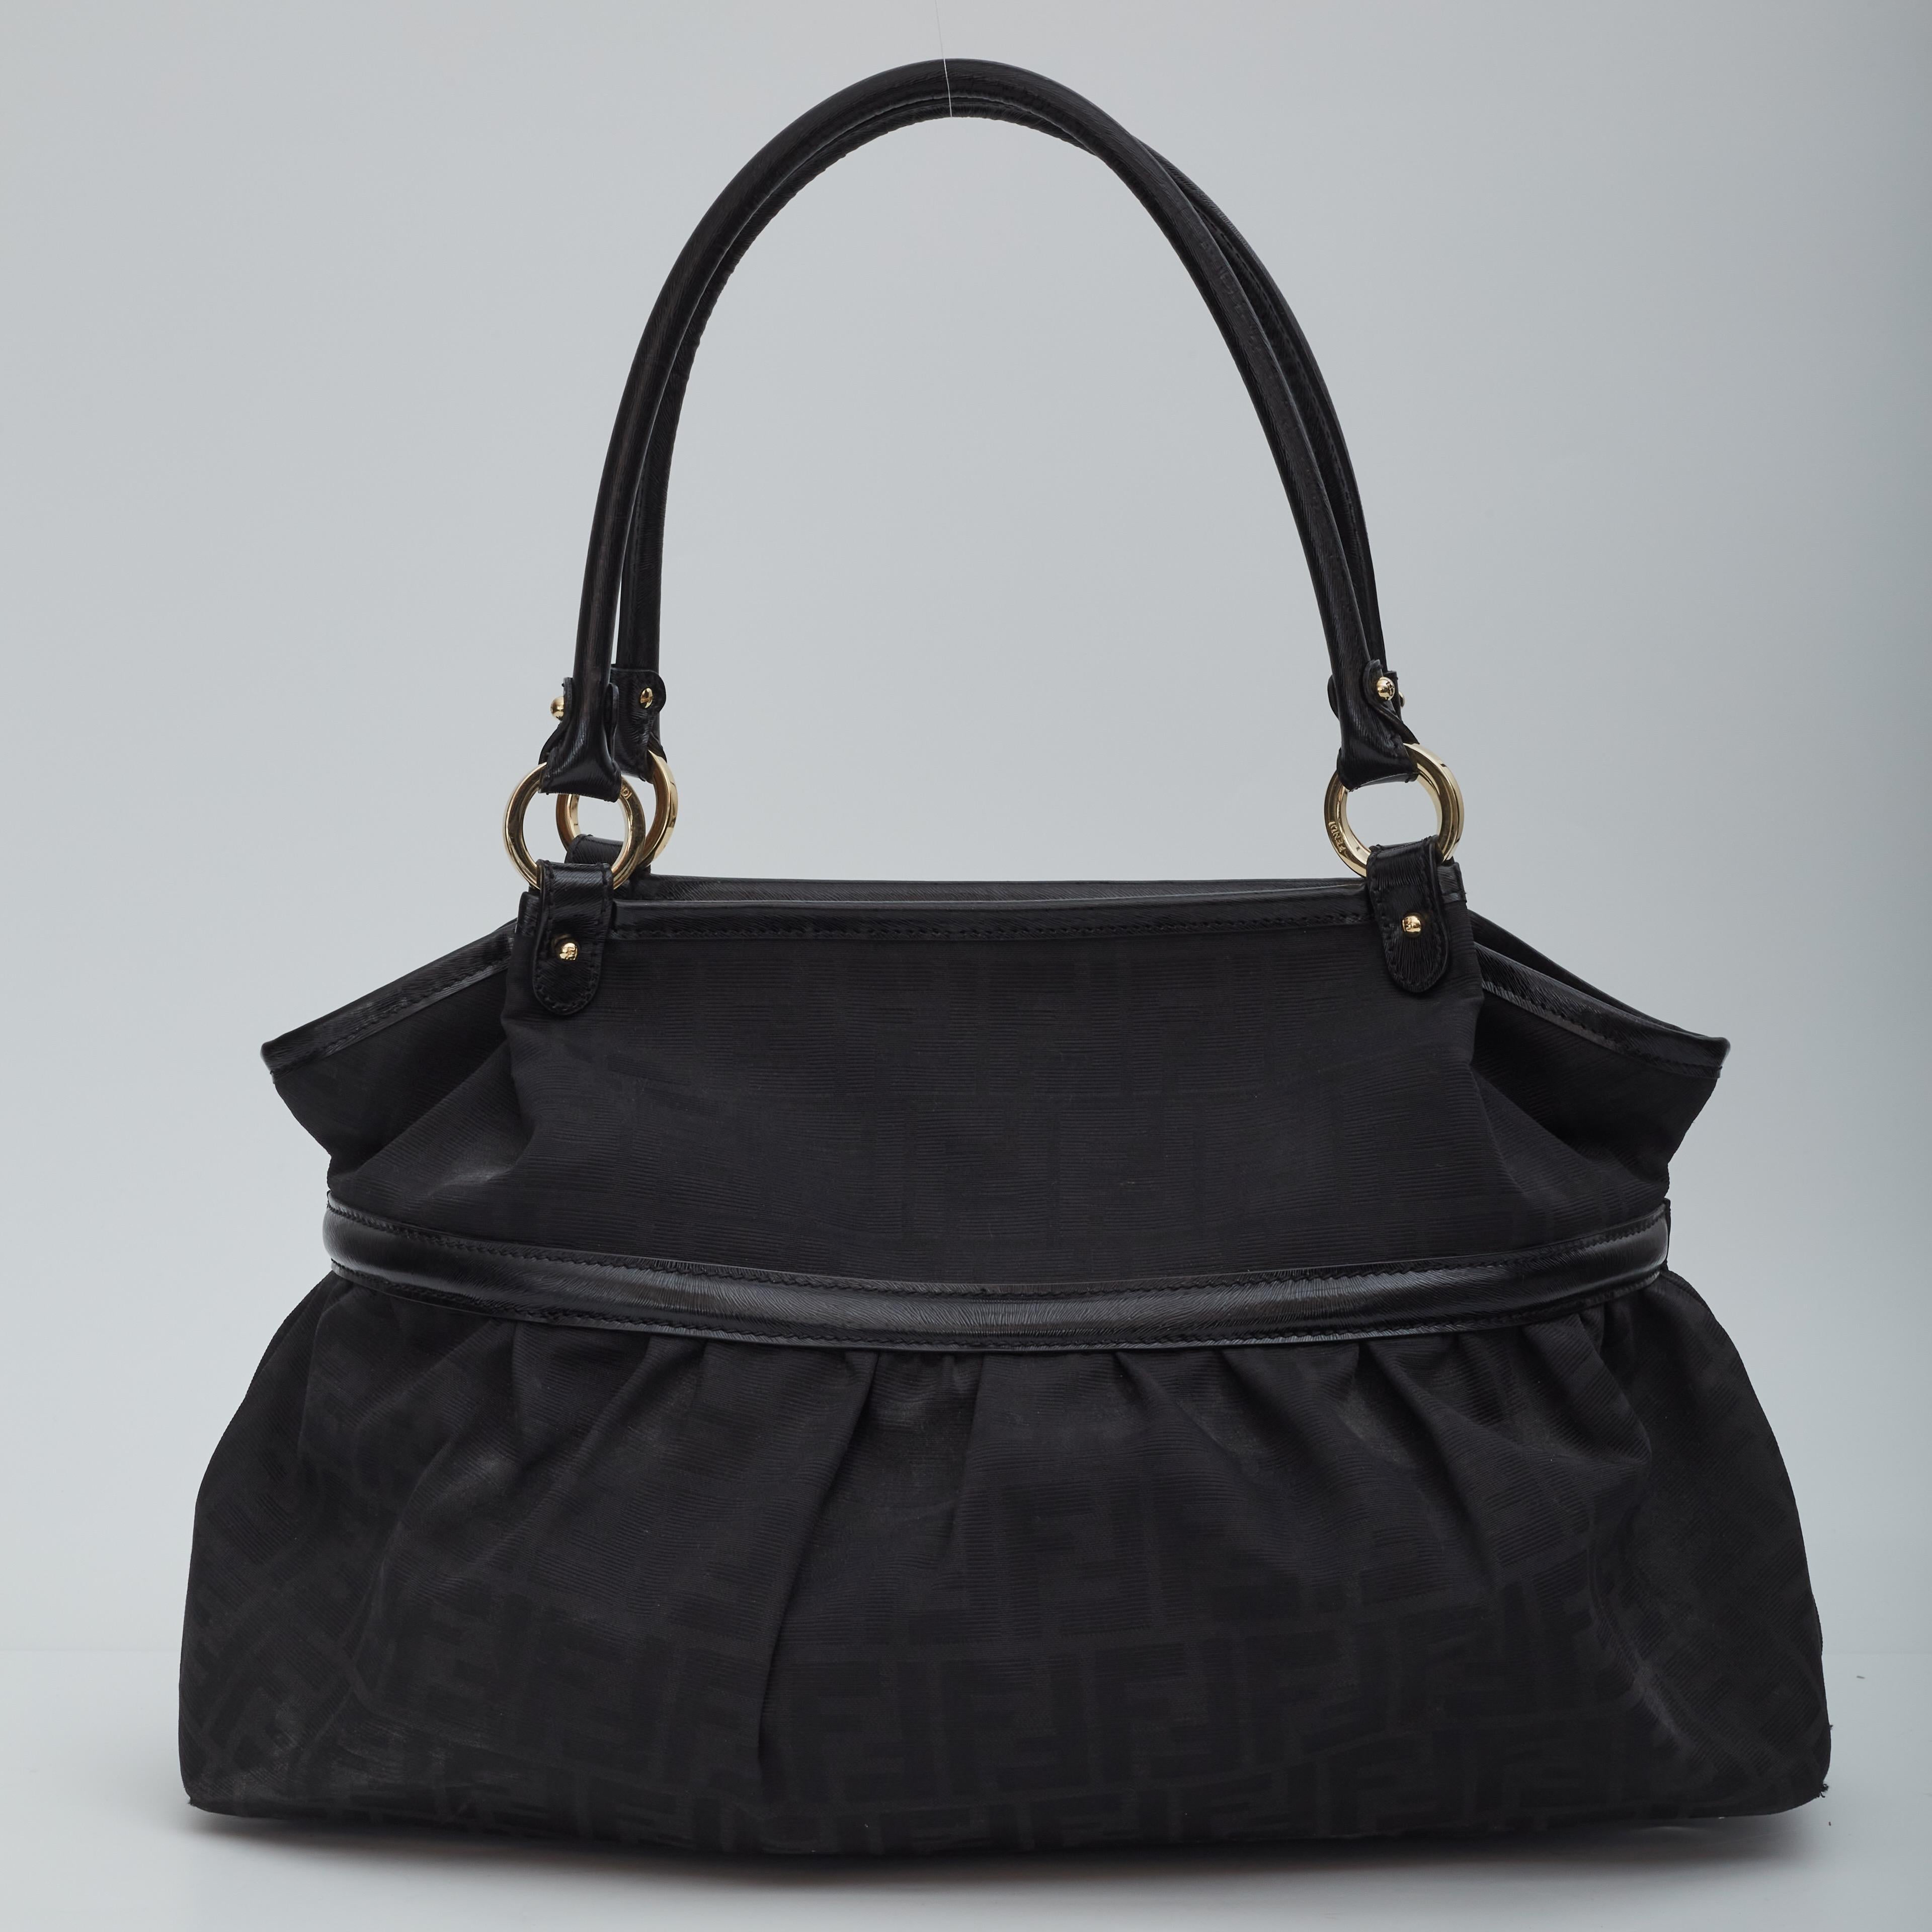 This bags constructed of signature FF Zucca canvas with black leather top handles and trim. The large disc-shaped Fendi handbag has polished brass hardware including handle rings and studs. The top unzips to a black fabric interior with a zip